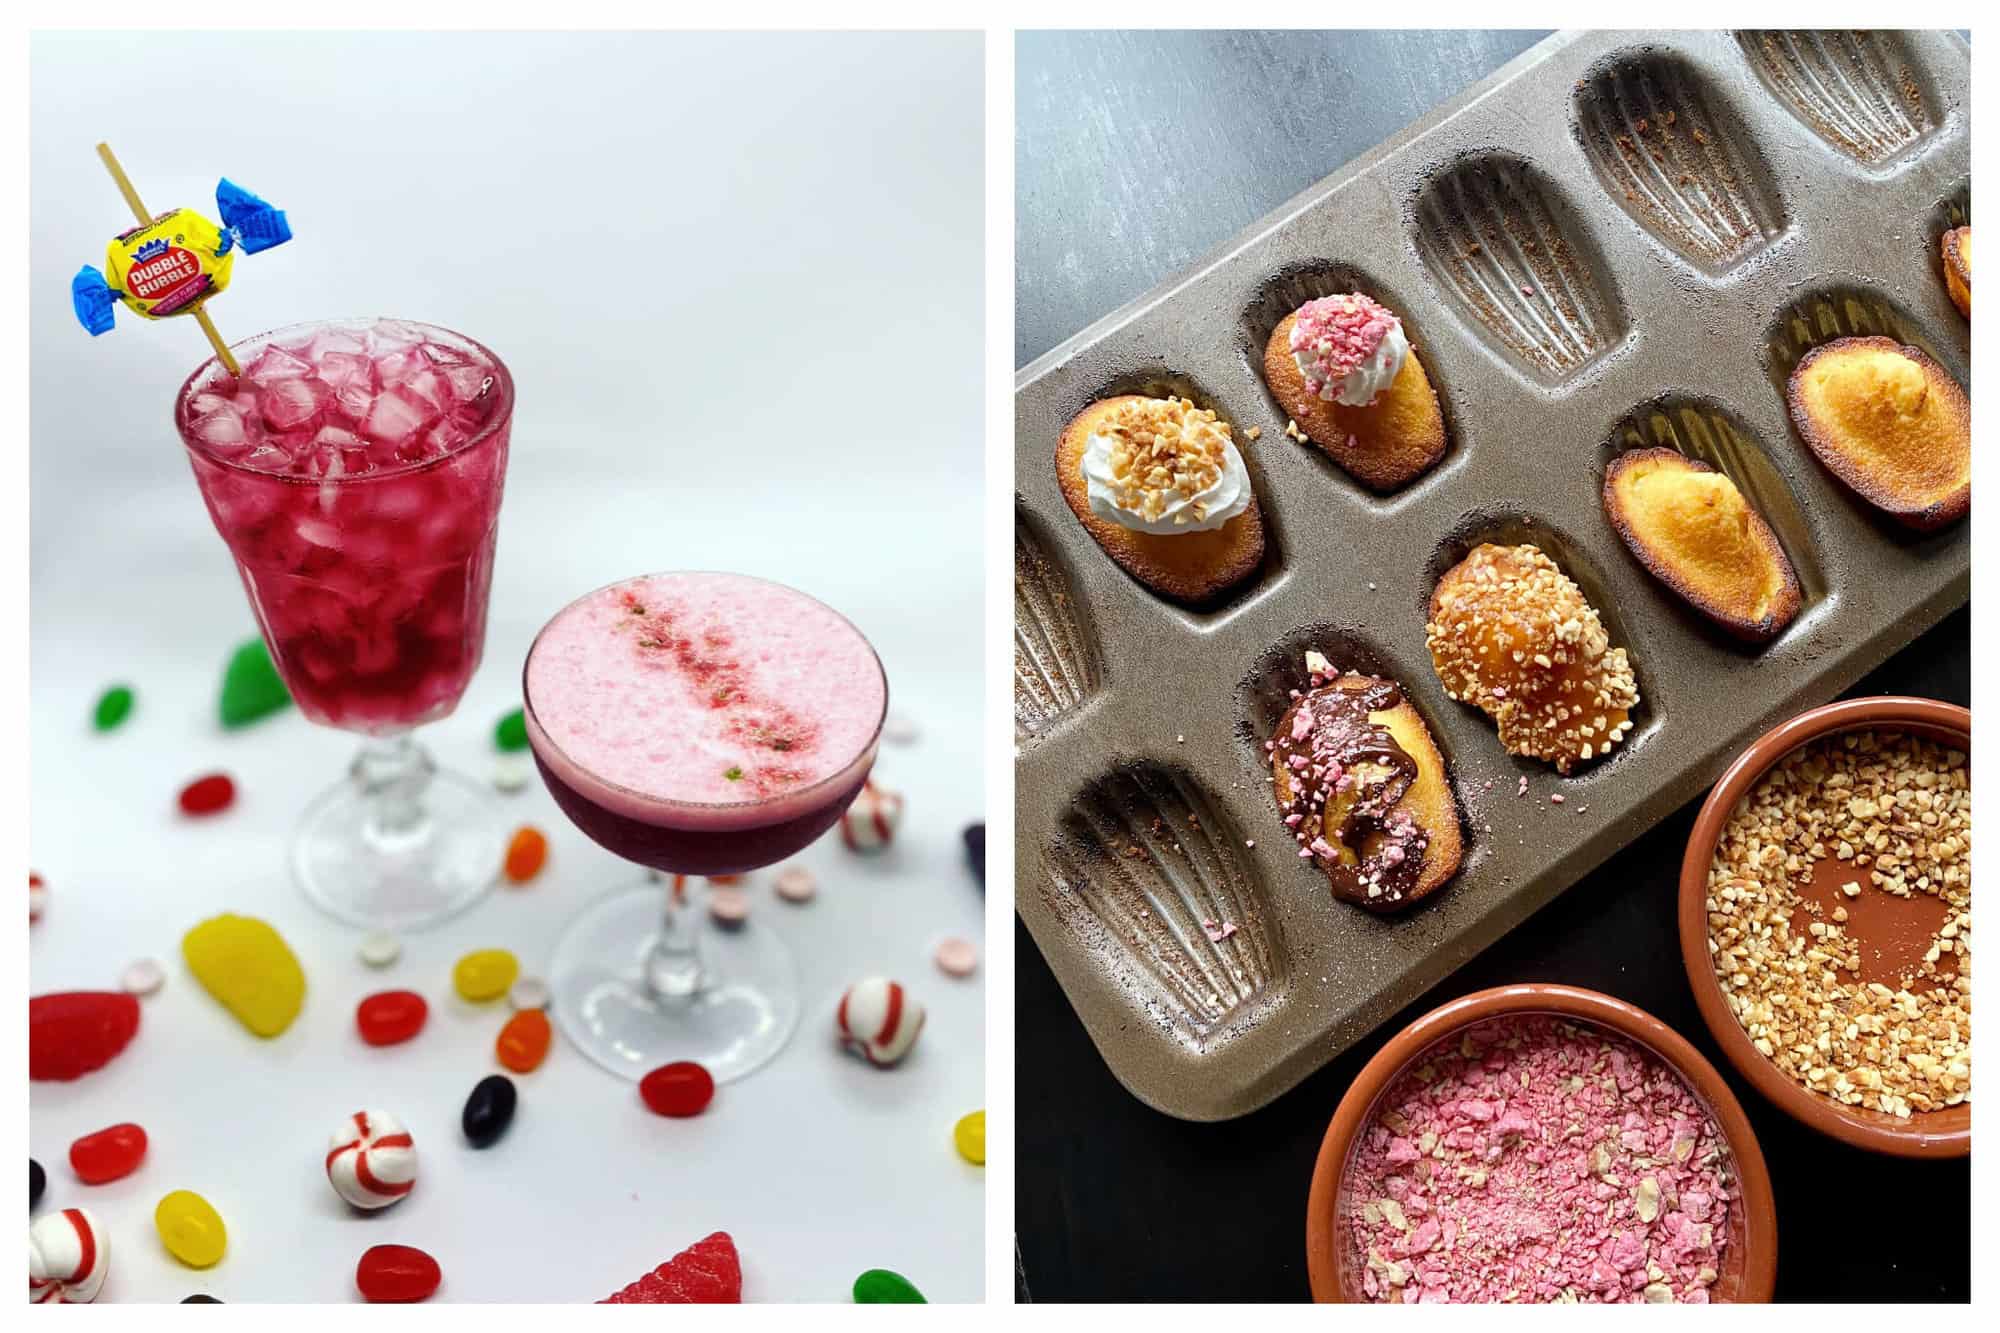 Left: two pink/red colored cocktails by Izzy's Paris on a table surrounded by various lollies. Right: Madeleines in a baking mould decorated with icing, cream, and crushed nuts.